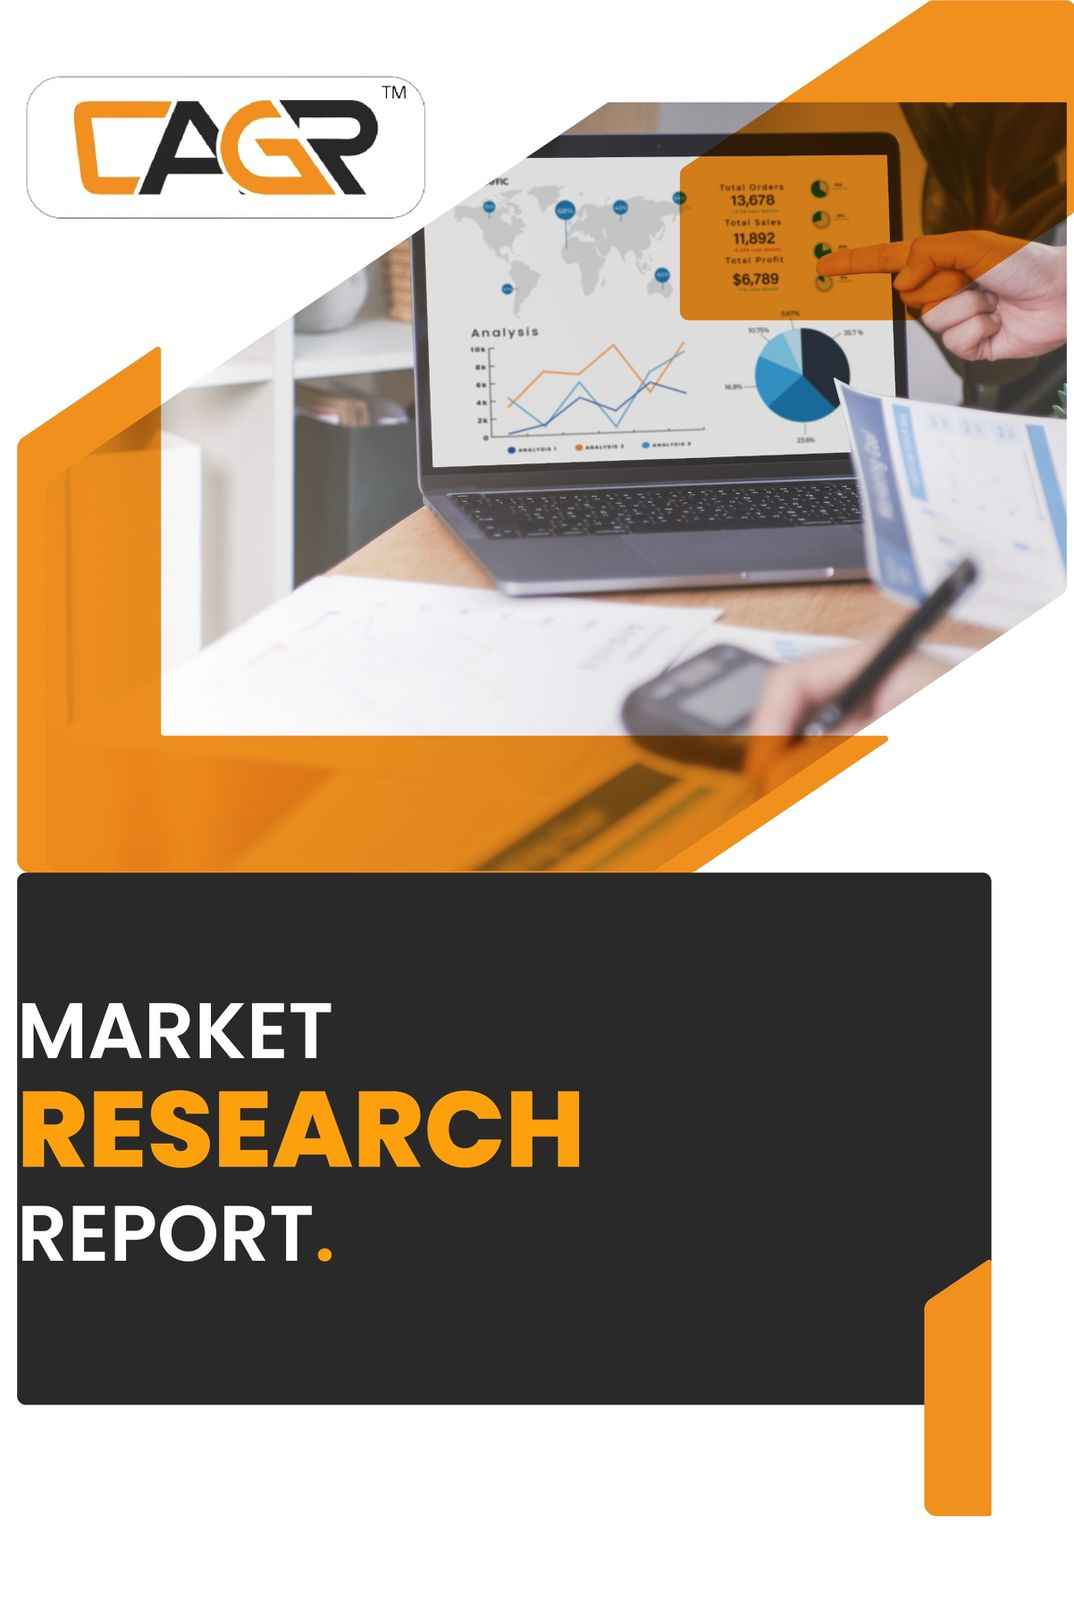 Global Active Data Warehousing Market Status, Trends and COVID-19 Impact Report 2022